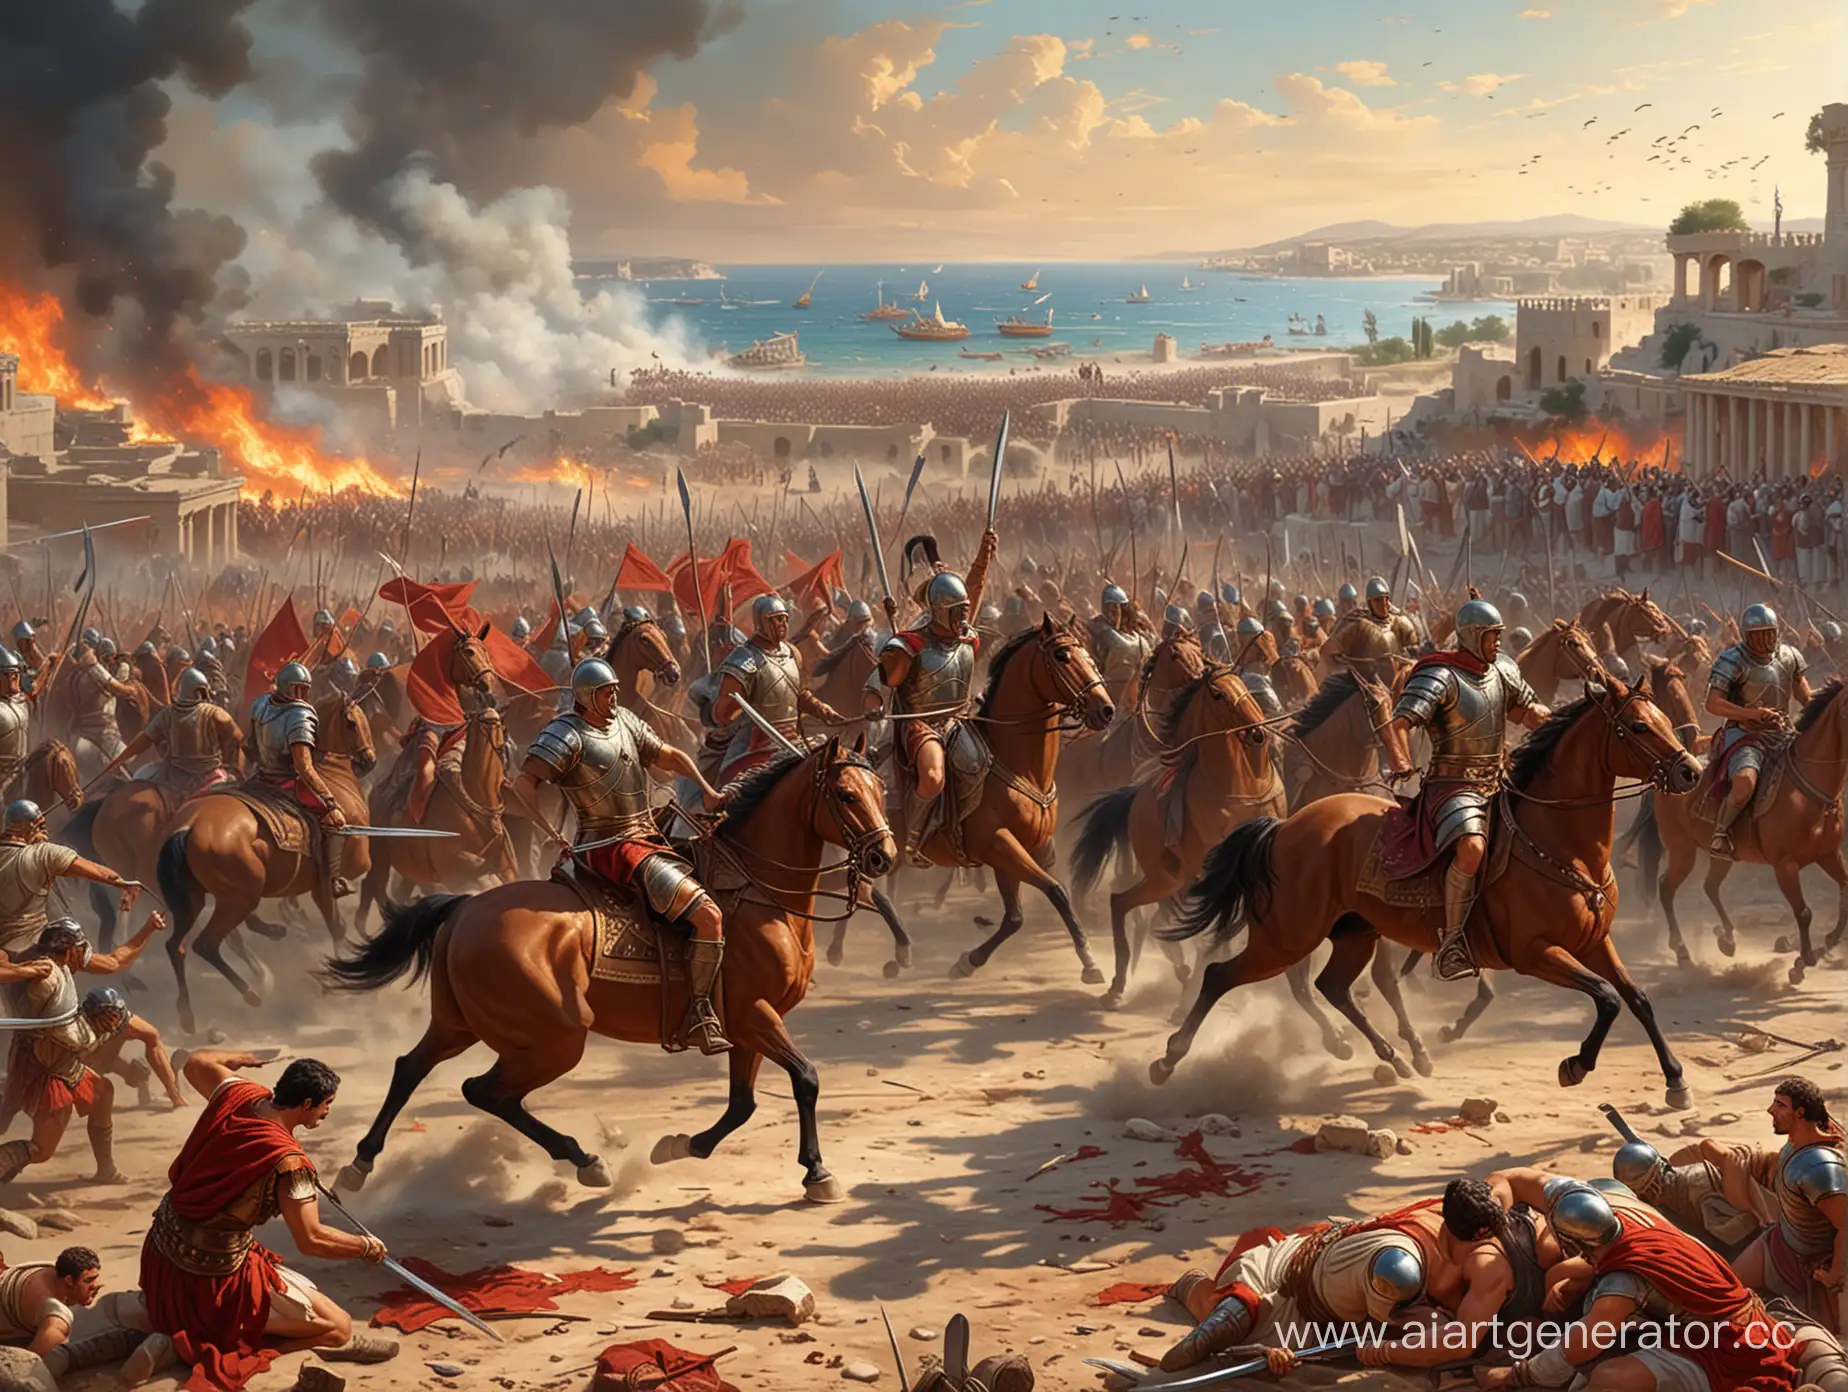 Ancient-Battle-of-Carthage-vs-Romans-Swords-Horses-and-Slaughter